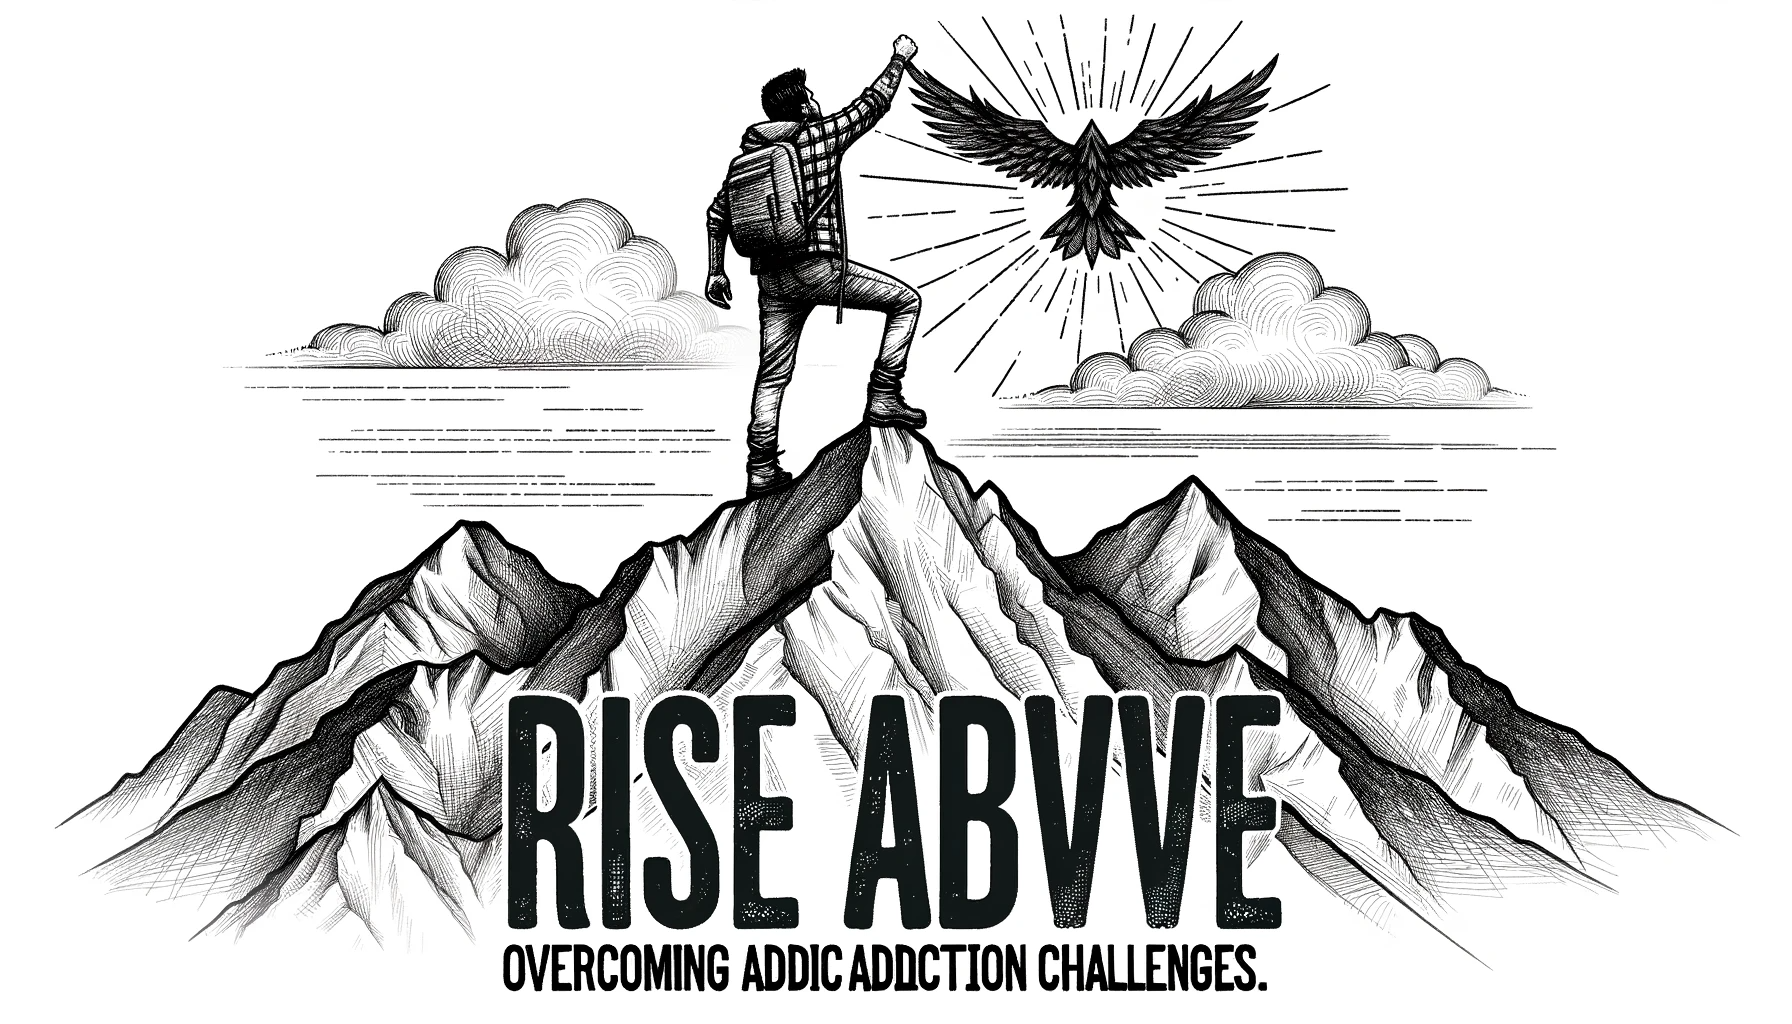 Mountain climber reaching the peak, symbolizing triumph over addiction in Saskatoon, Saskatchewan - Diverse individuals finding support and hope in drug and alcohol treatment in Saskatoon.